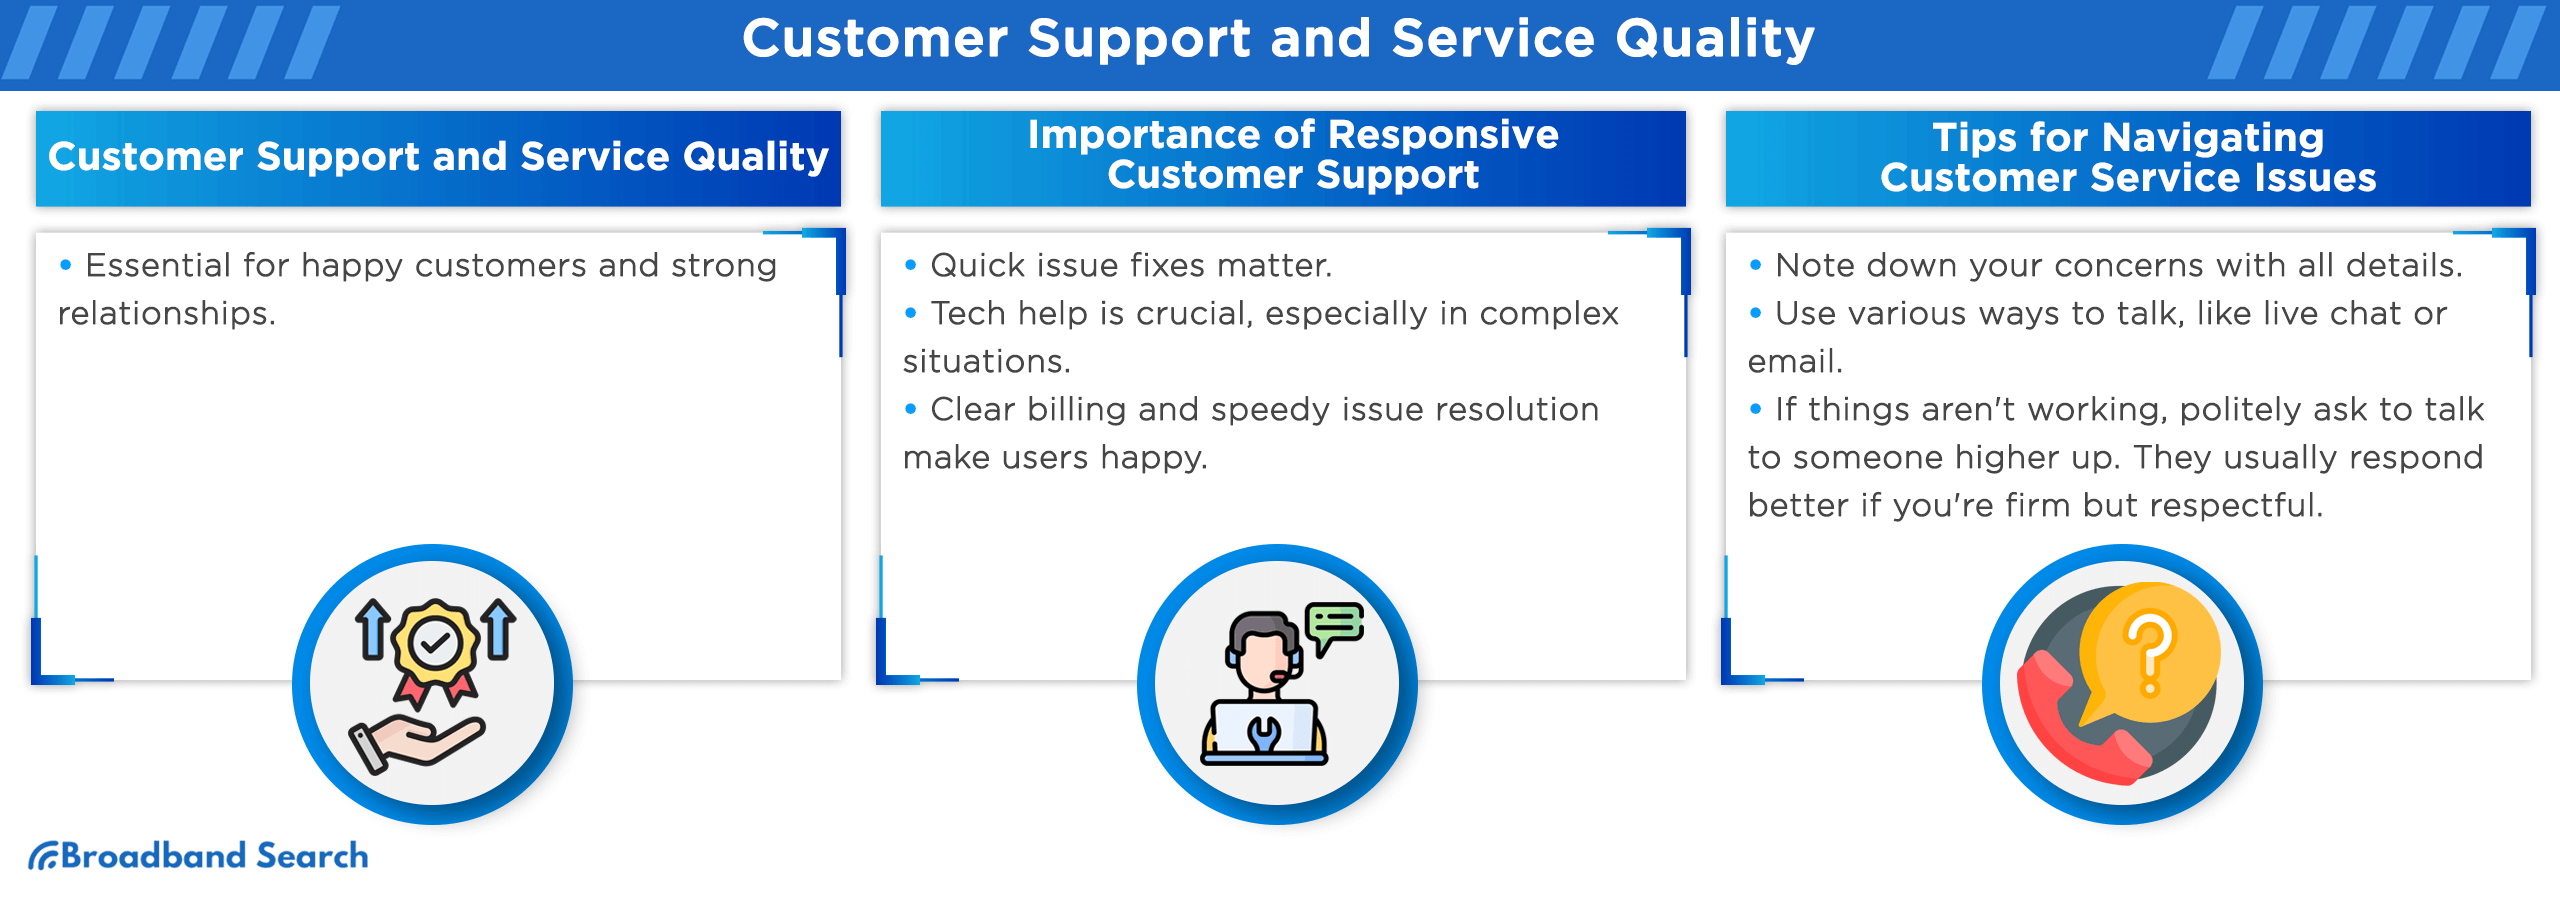 Customer support and service quality